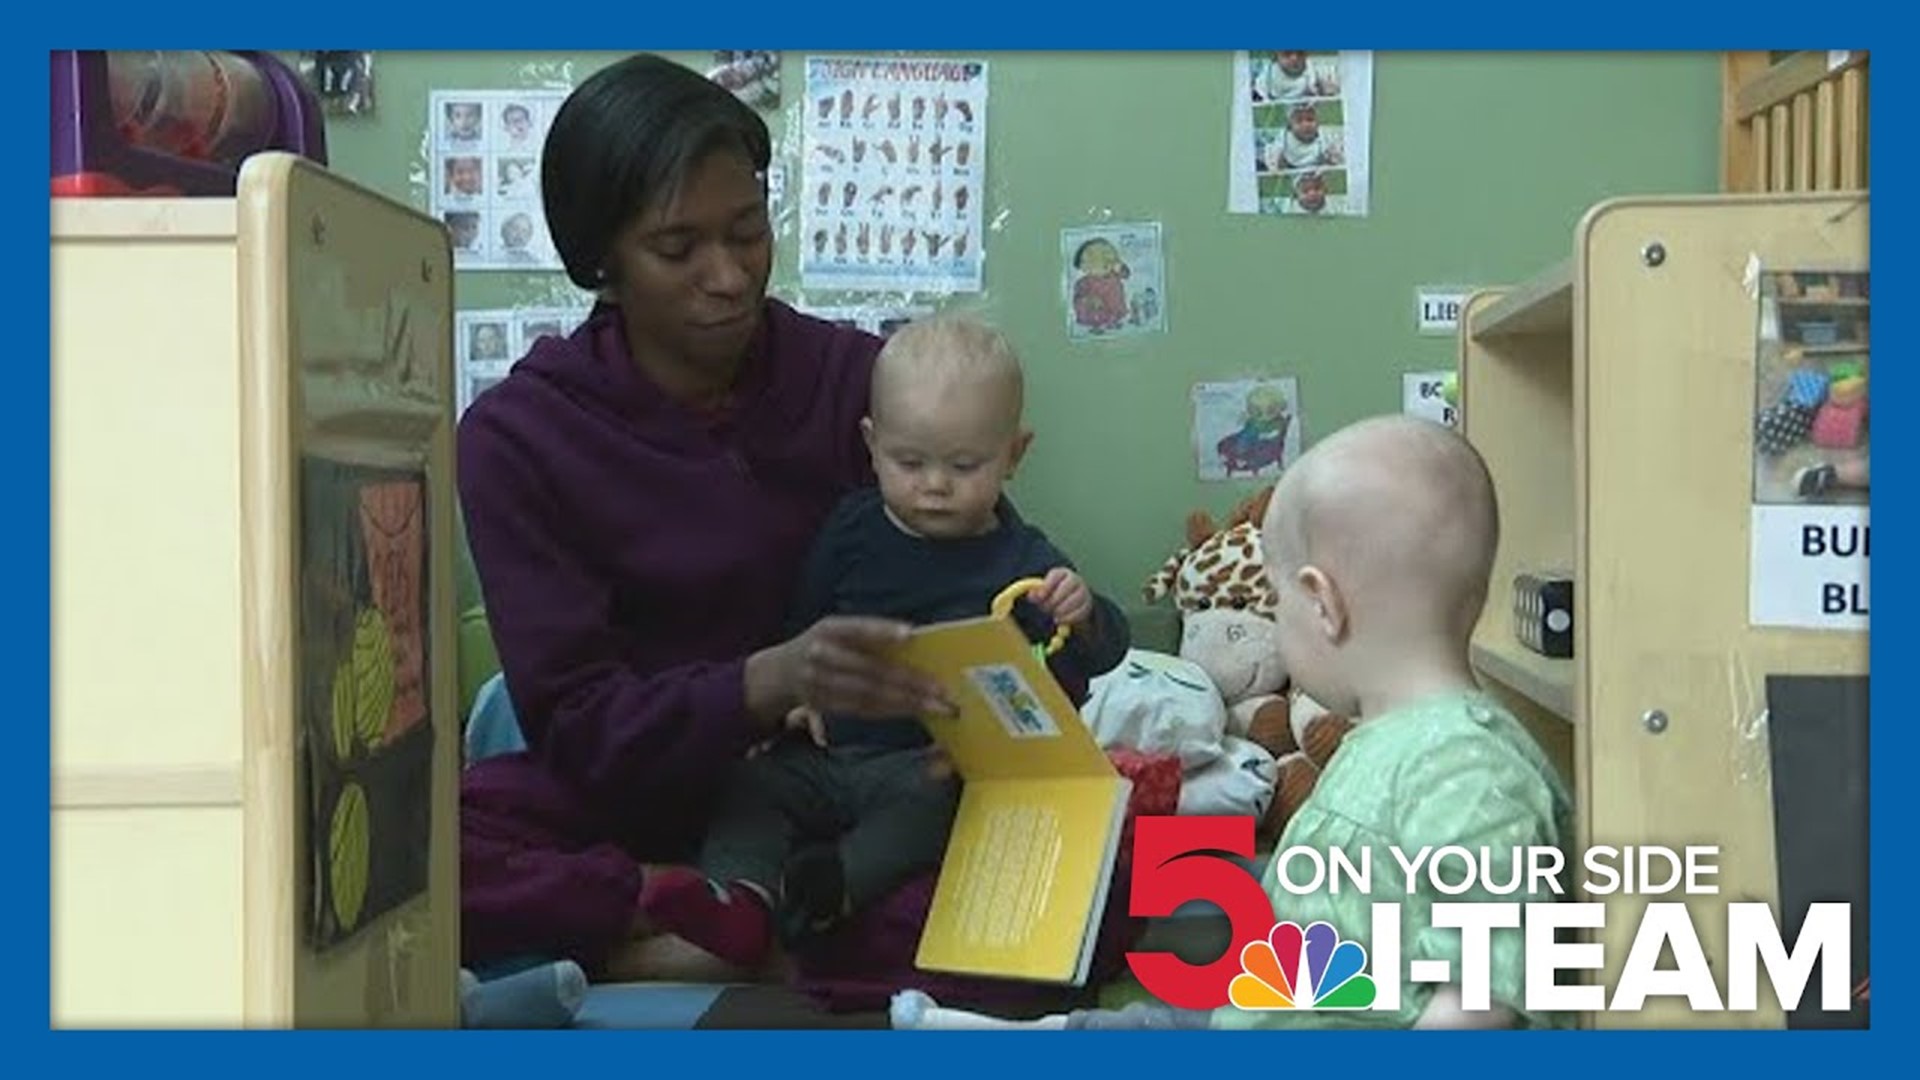 The I-Team delves into a pressing issue affecting families and child care providers across Missouri. One provider has not been paid for months.